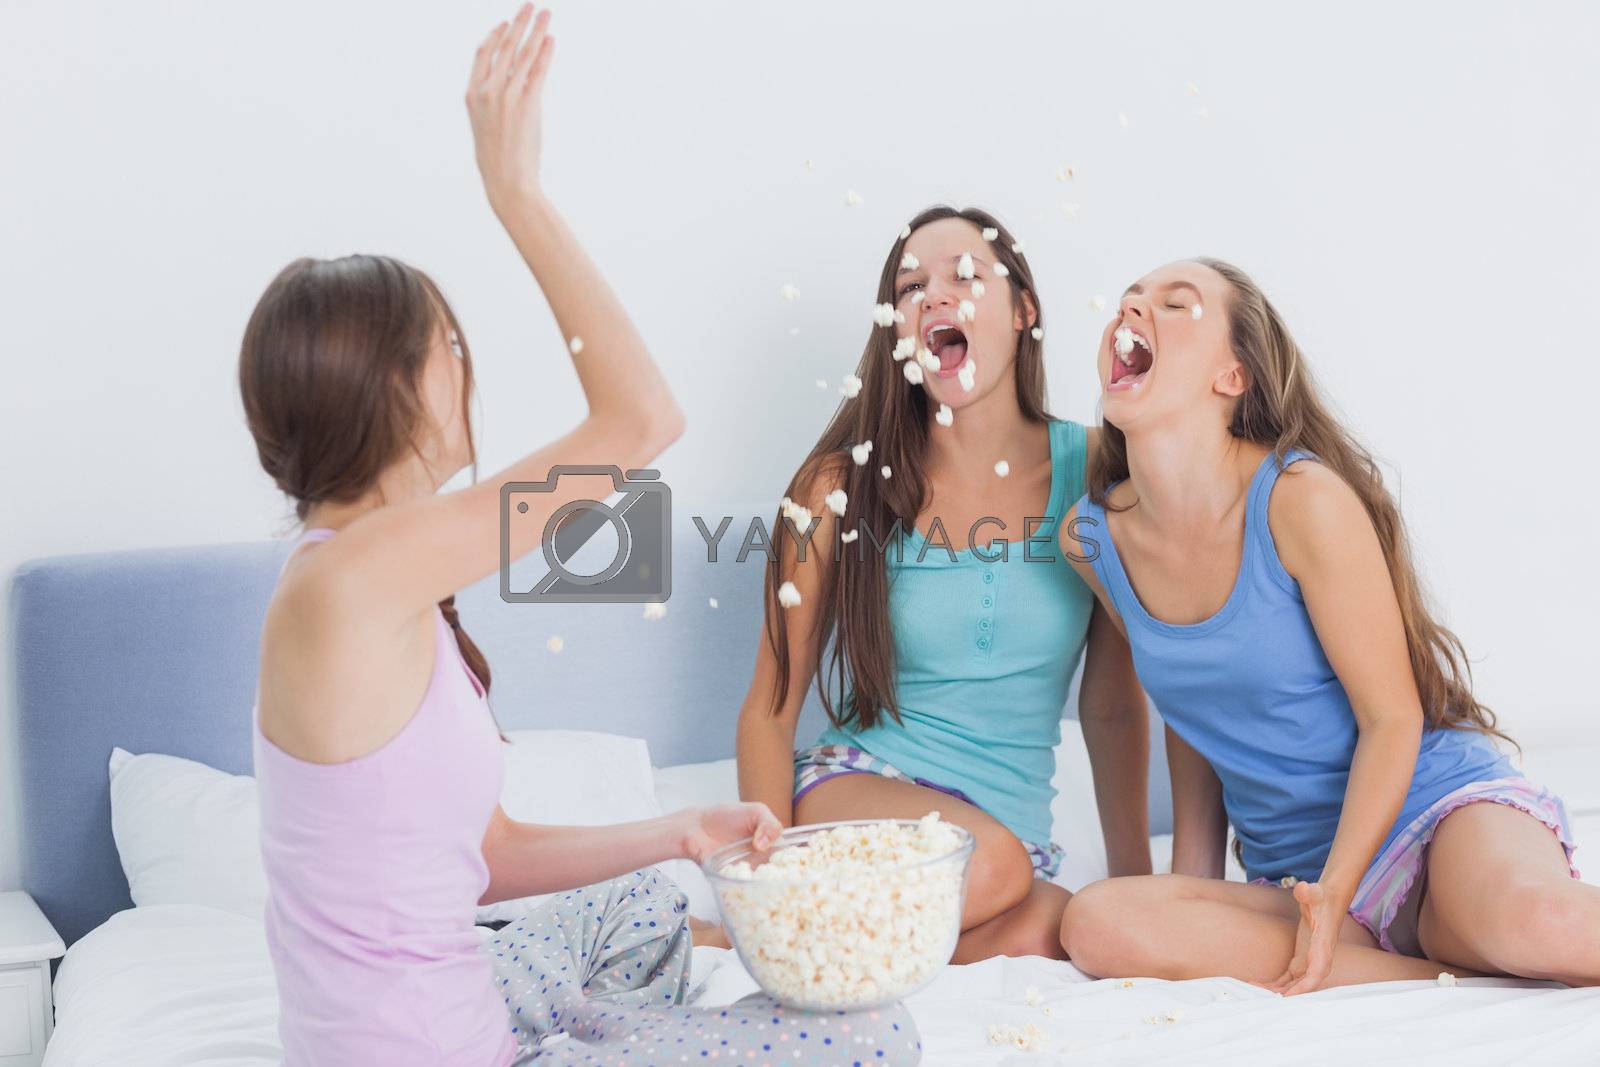 Royalty free image of Friends messing around at slumber party by Wavebreakmedia